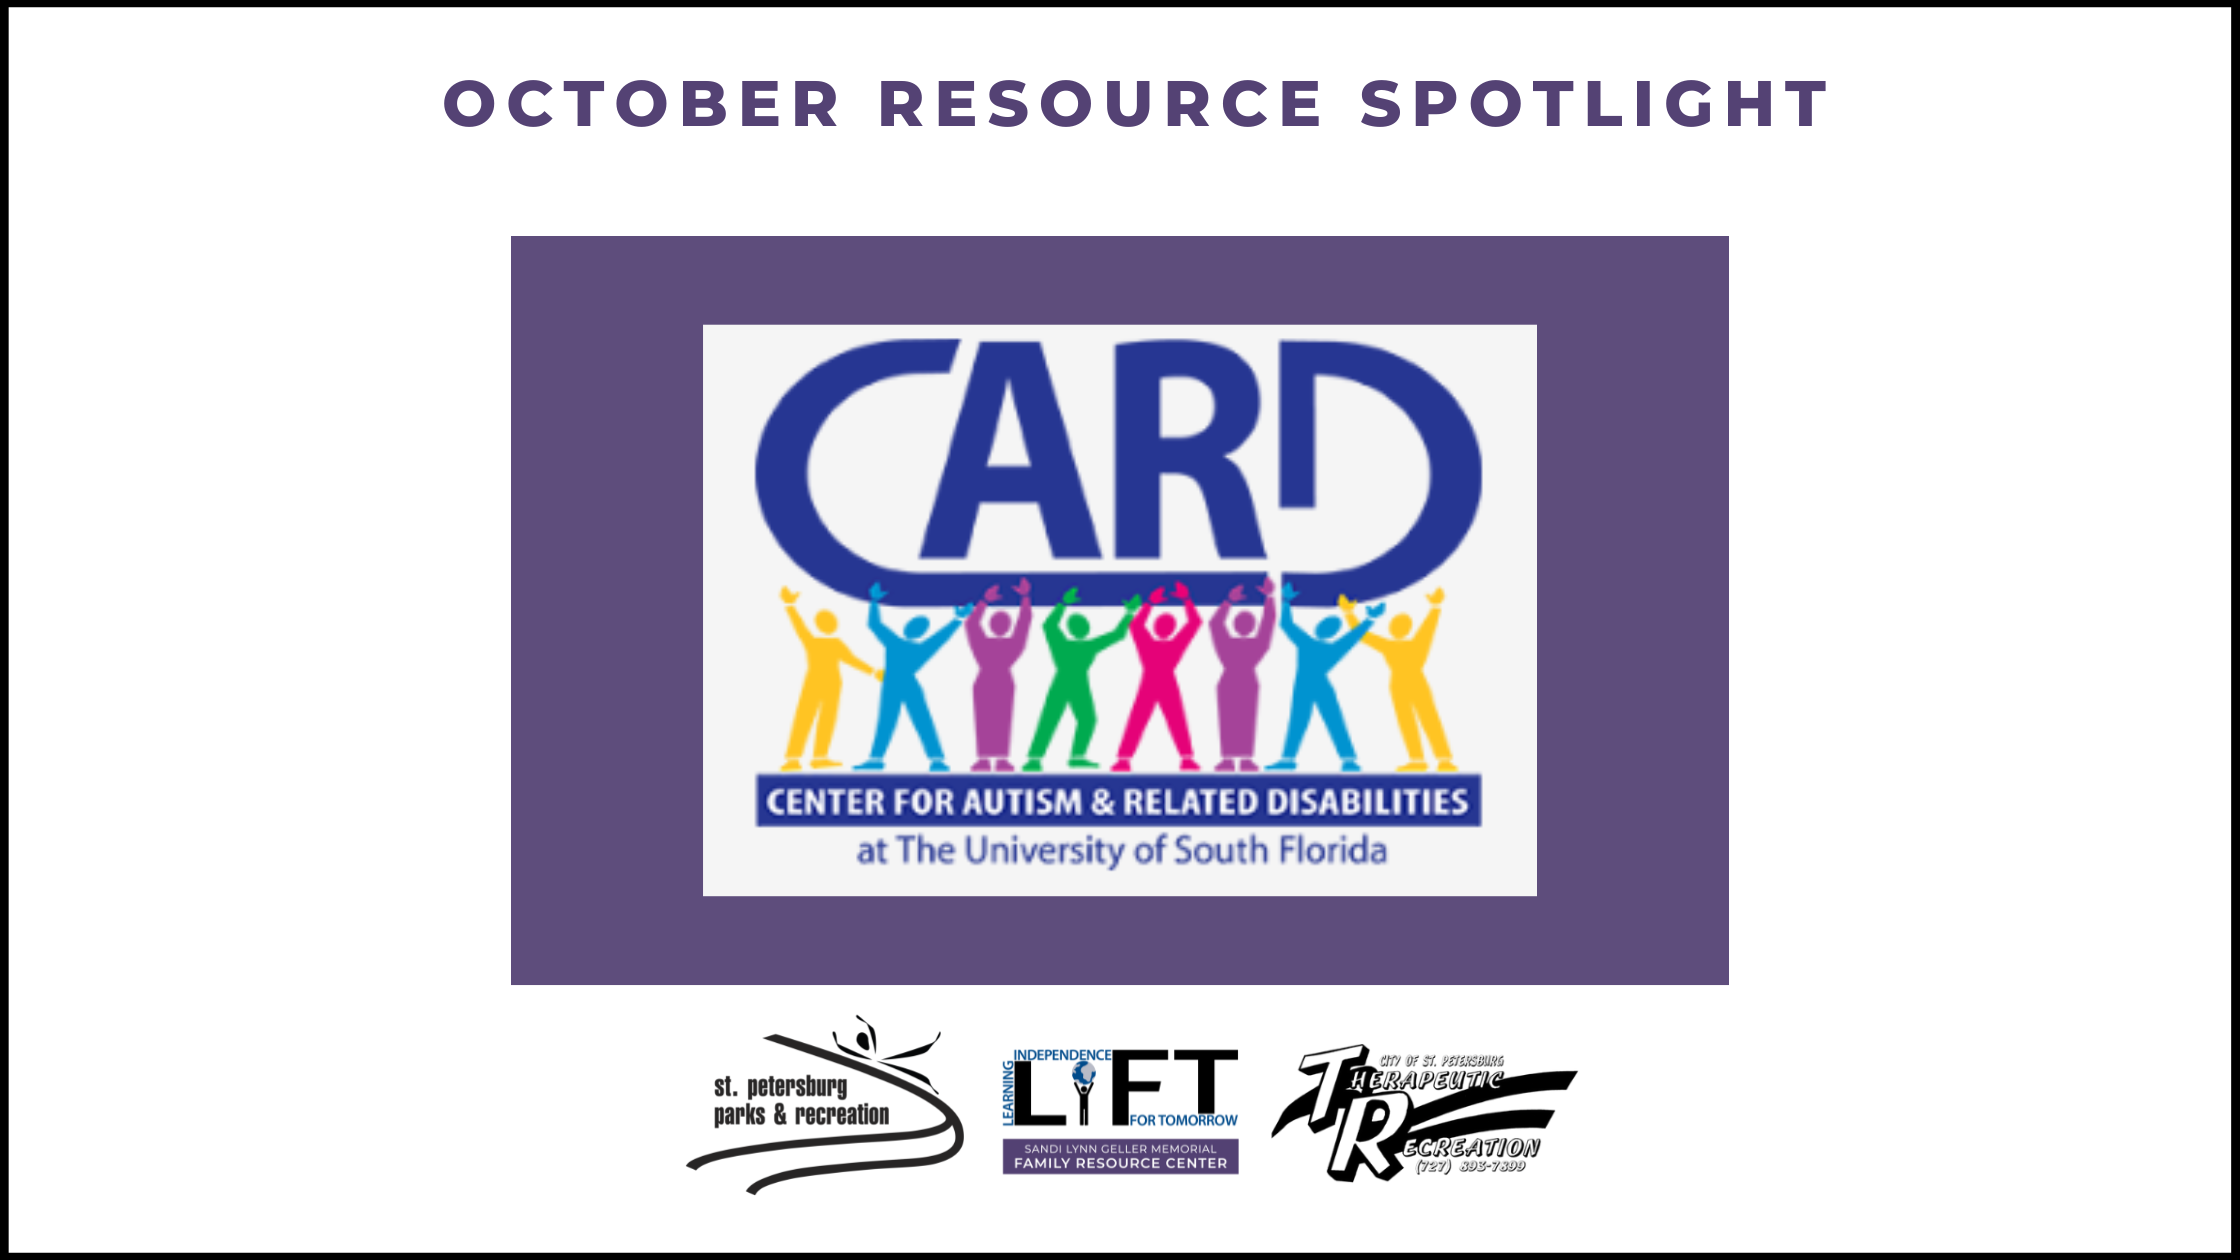 October Resource Spotlight: Care Center for Autism and Related Disabilities (CARD)